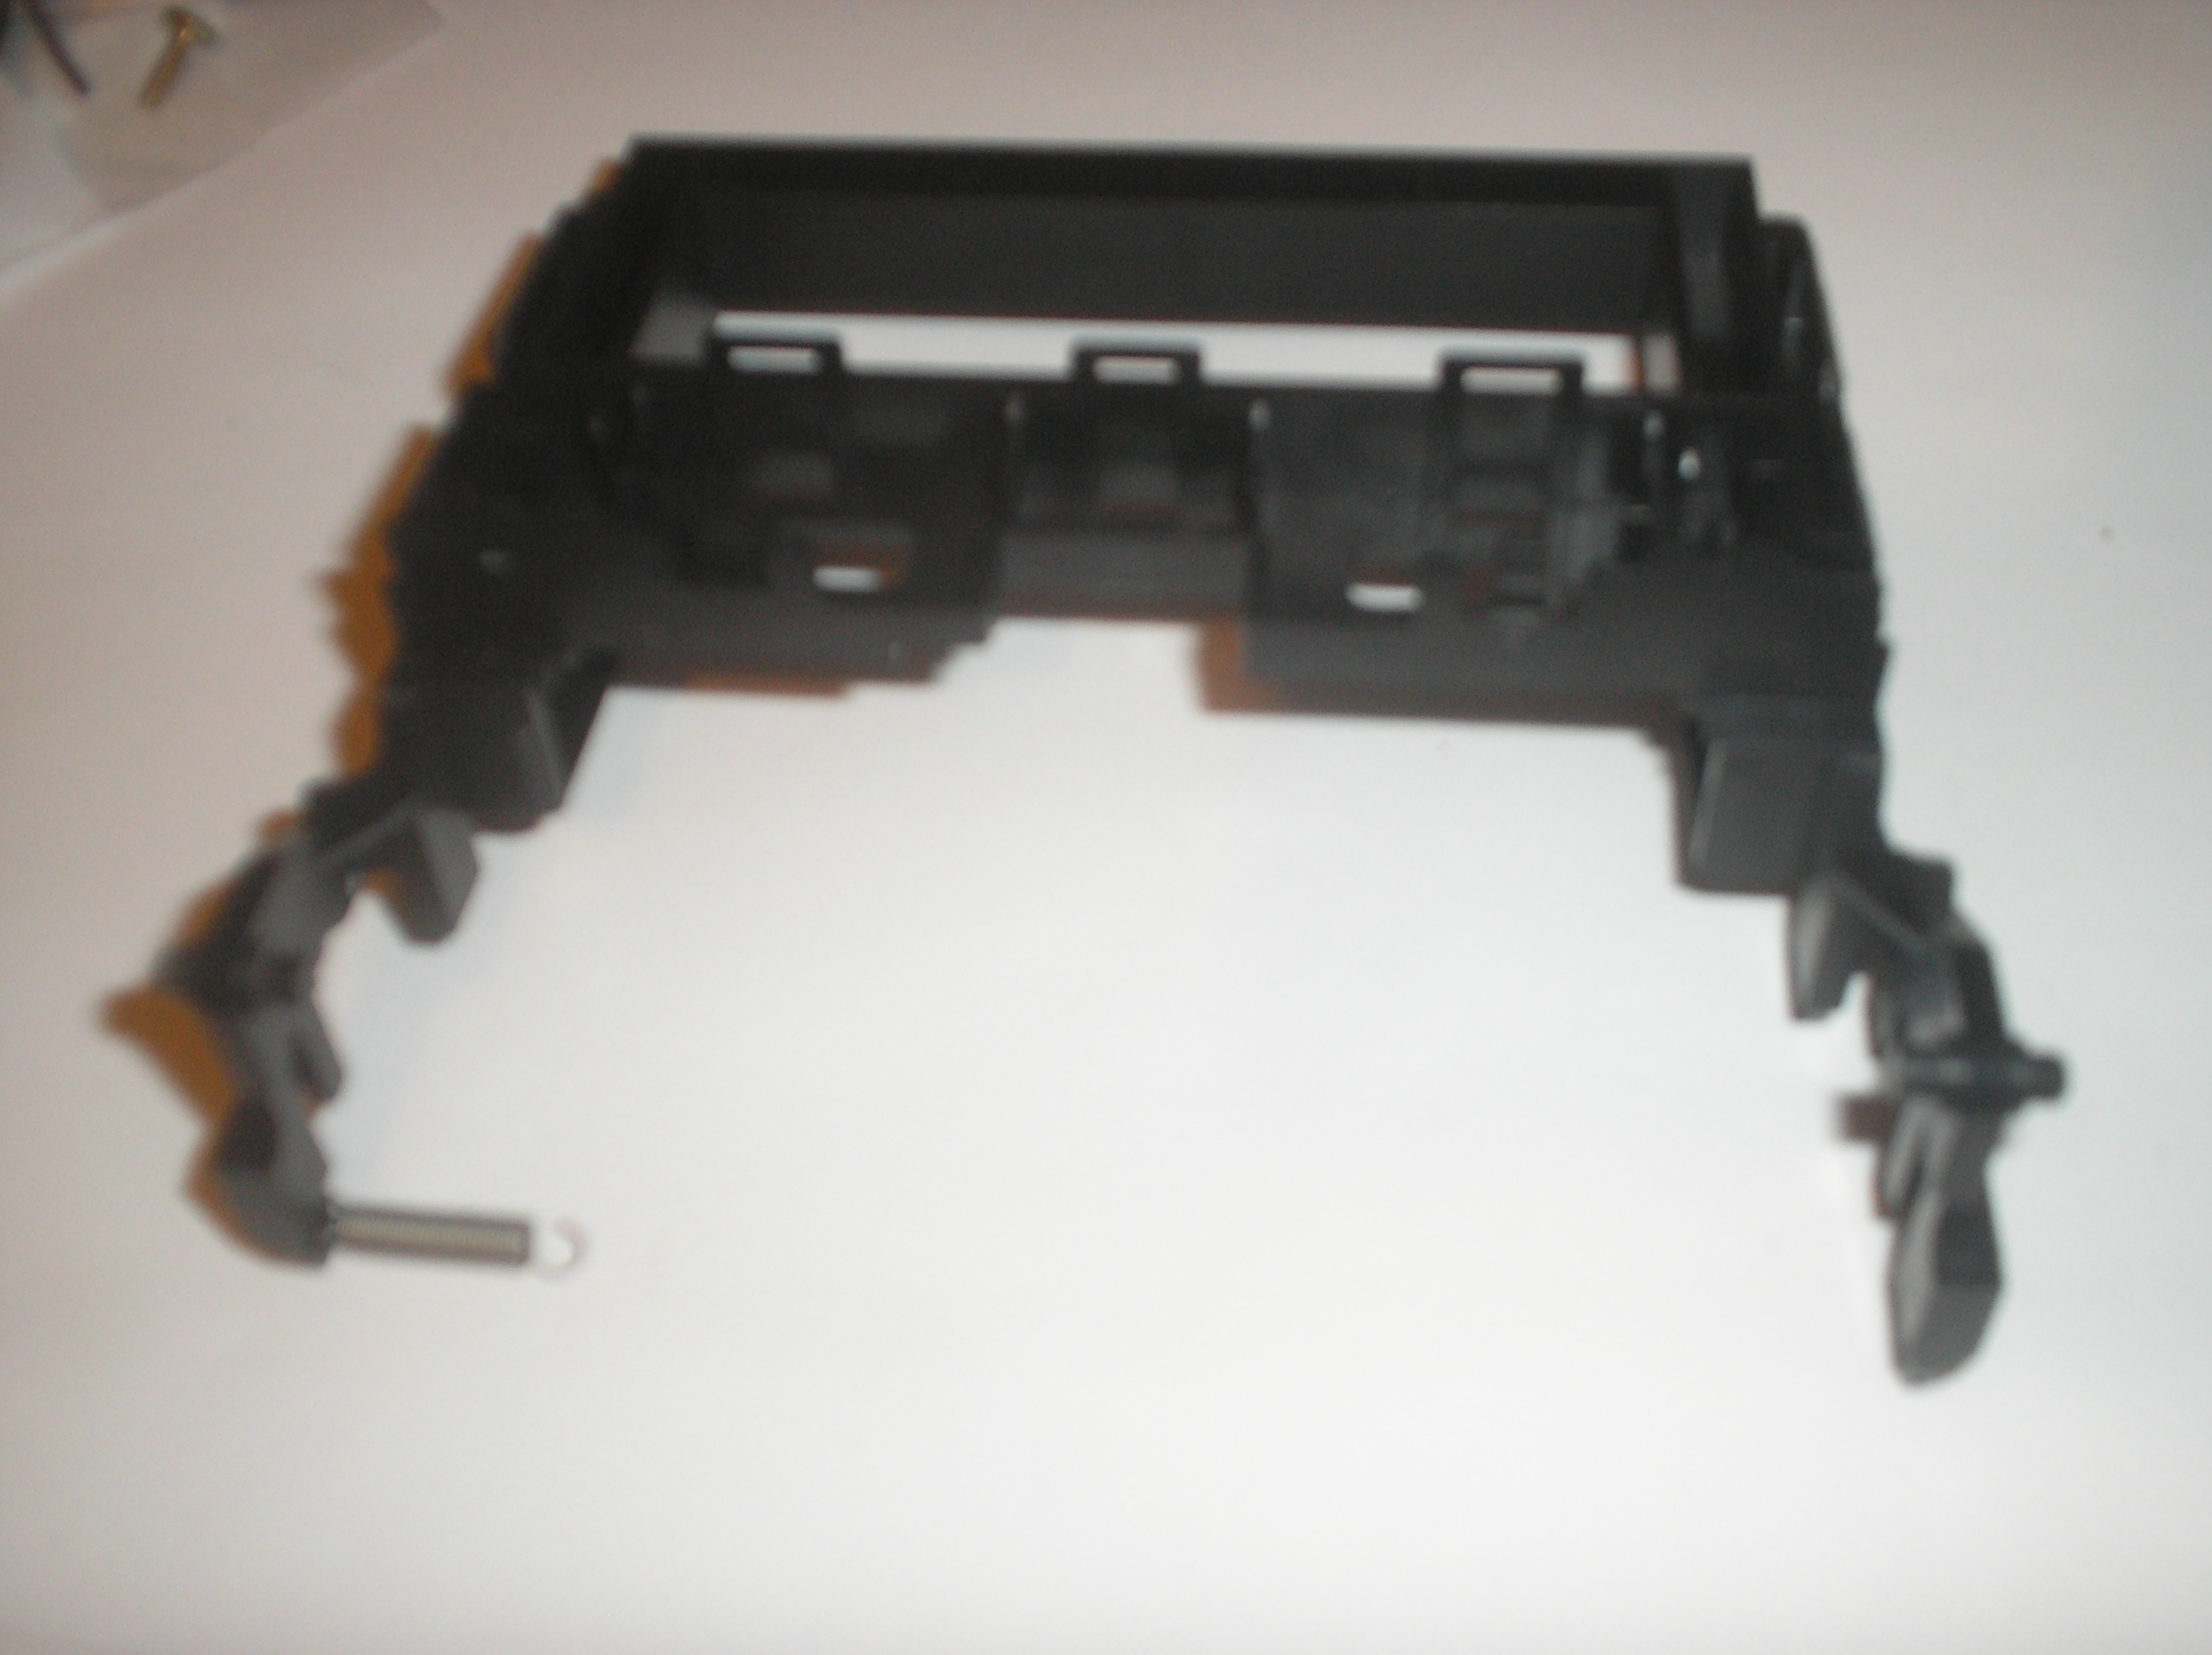 RS-T230 Cassette Deck Tape Holder Assy.  item is used. Technics Part number is sge1912